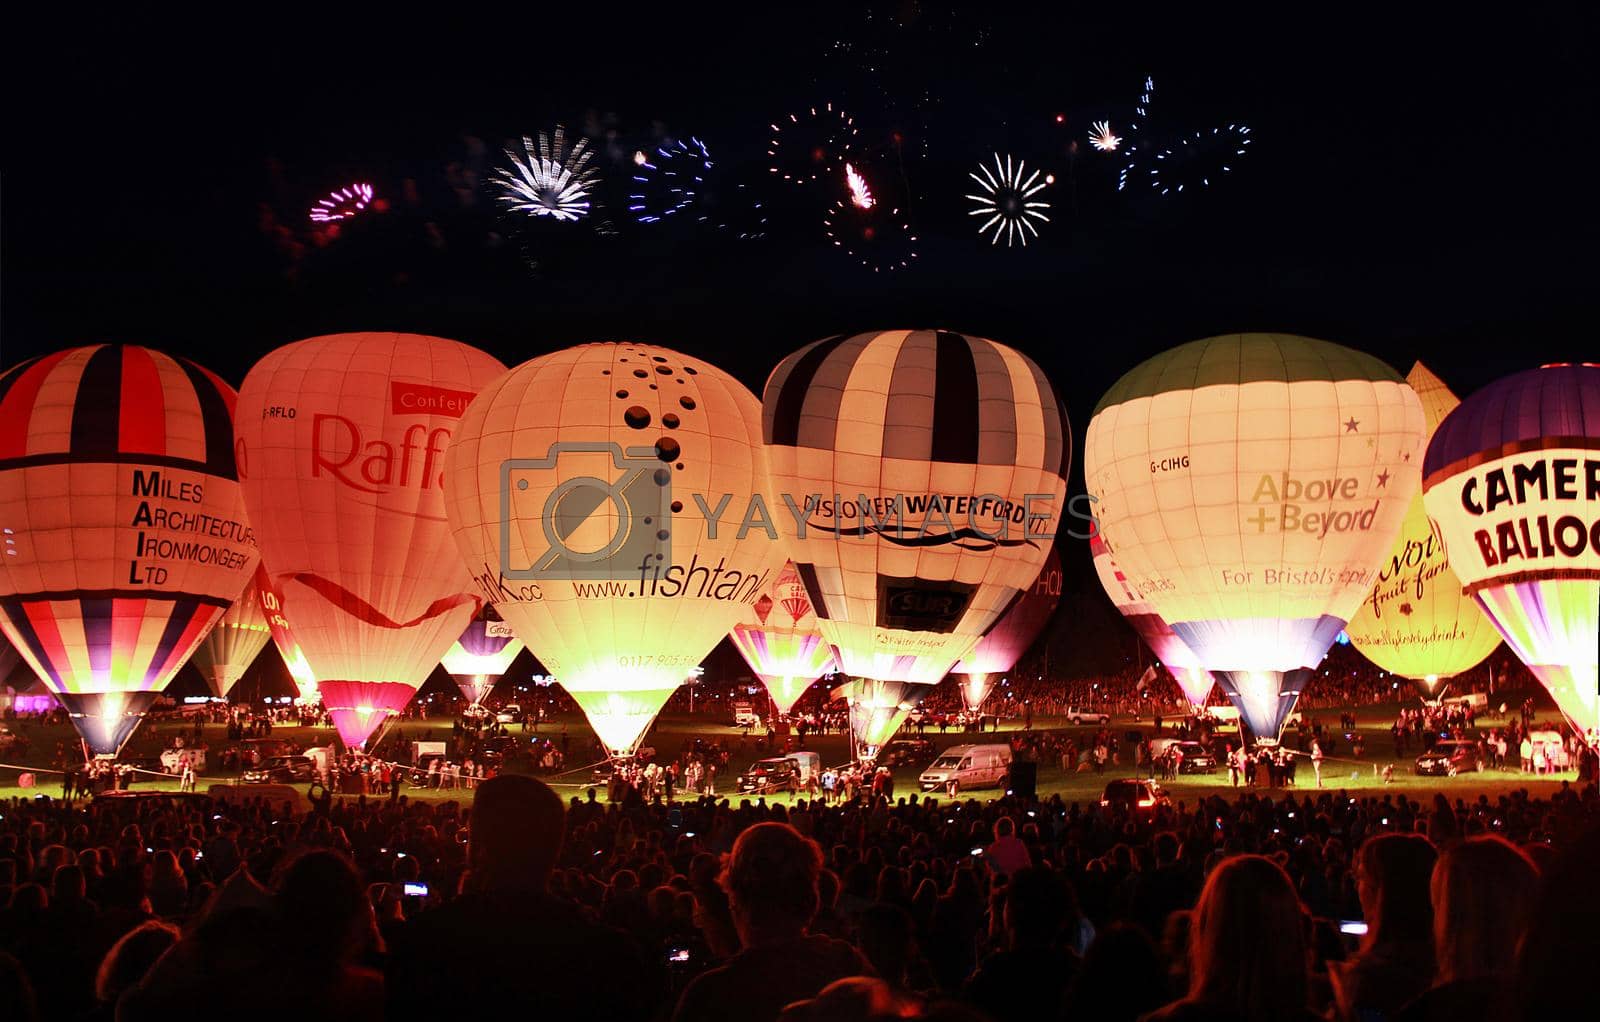 Bristol balloons lined up for the festival fireworks celebration at night, Bristol, UK. High quality photo.